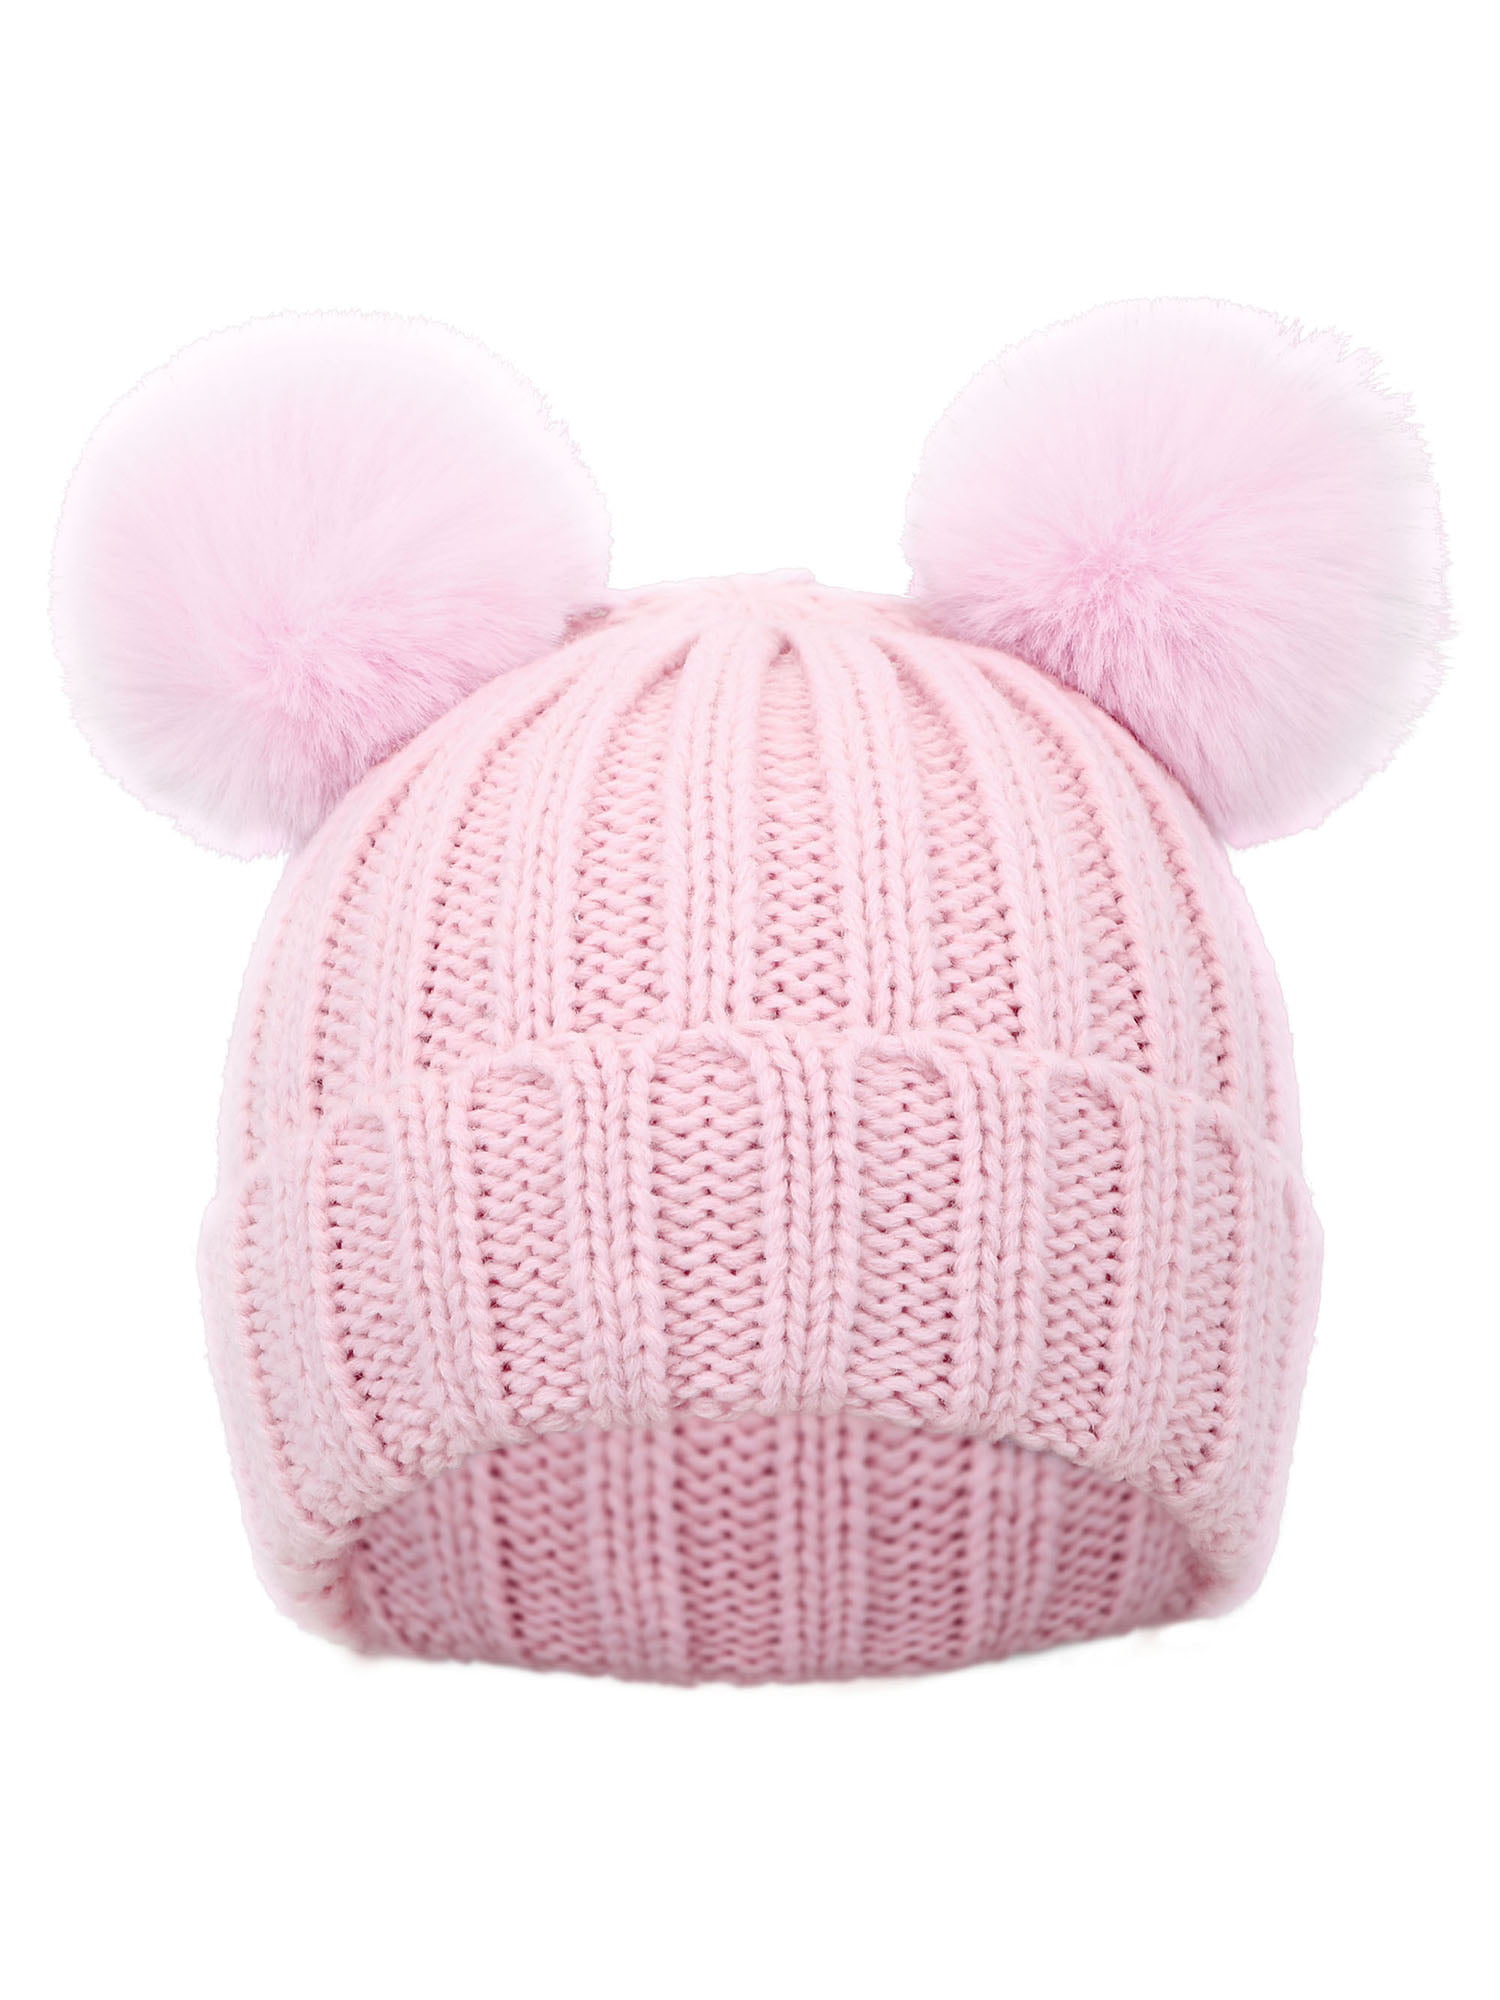 Pom Pom Beanie Black Beanie Beige Beanie|Beanies For Toddlers|Cute Beanie Beanies For Girls Cute Beanies Pink Beanie Furry Cute Beanie